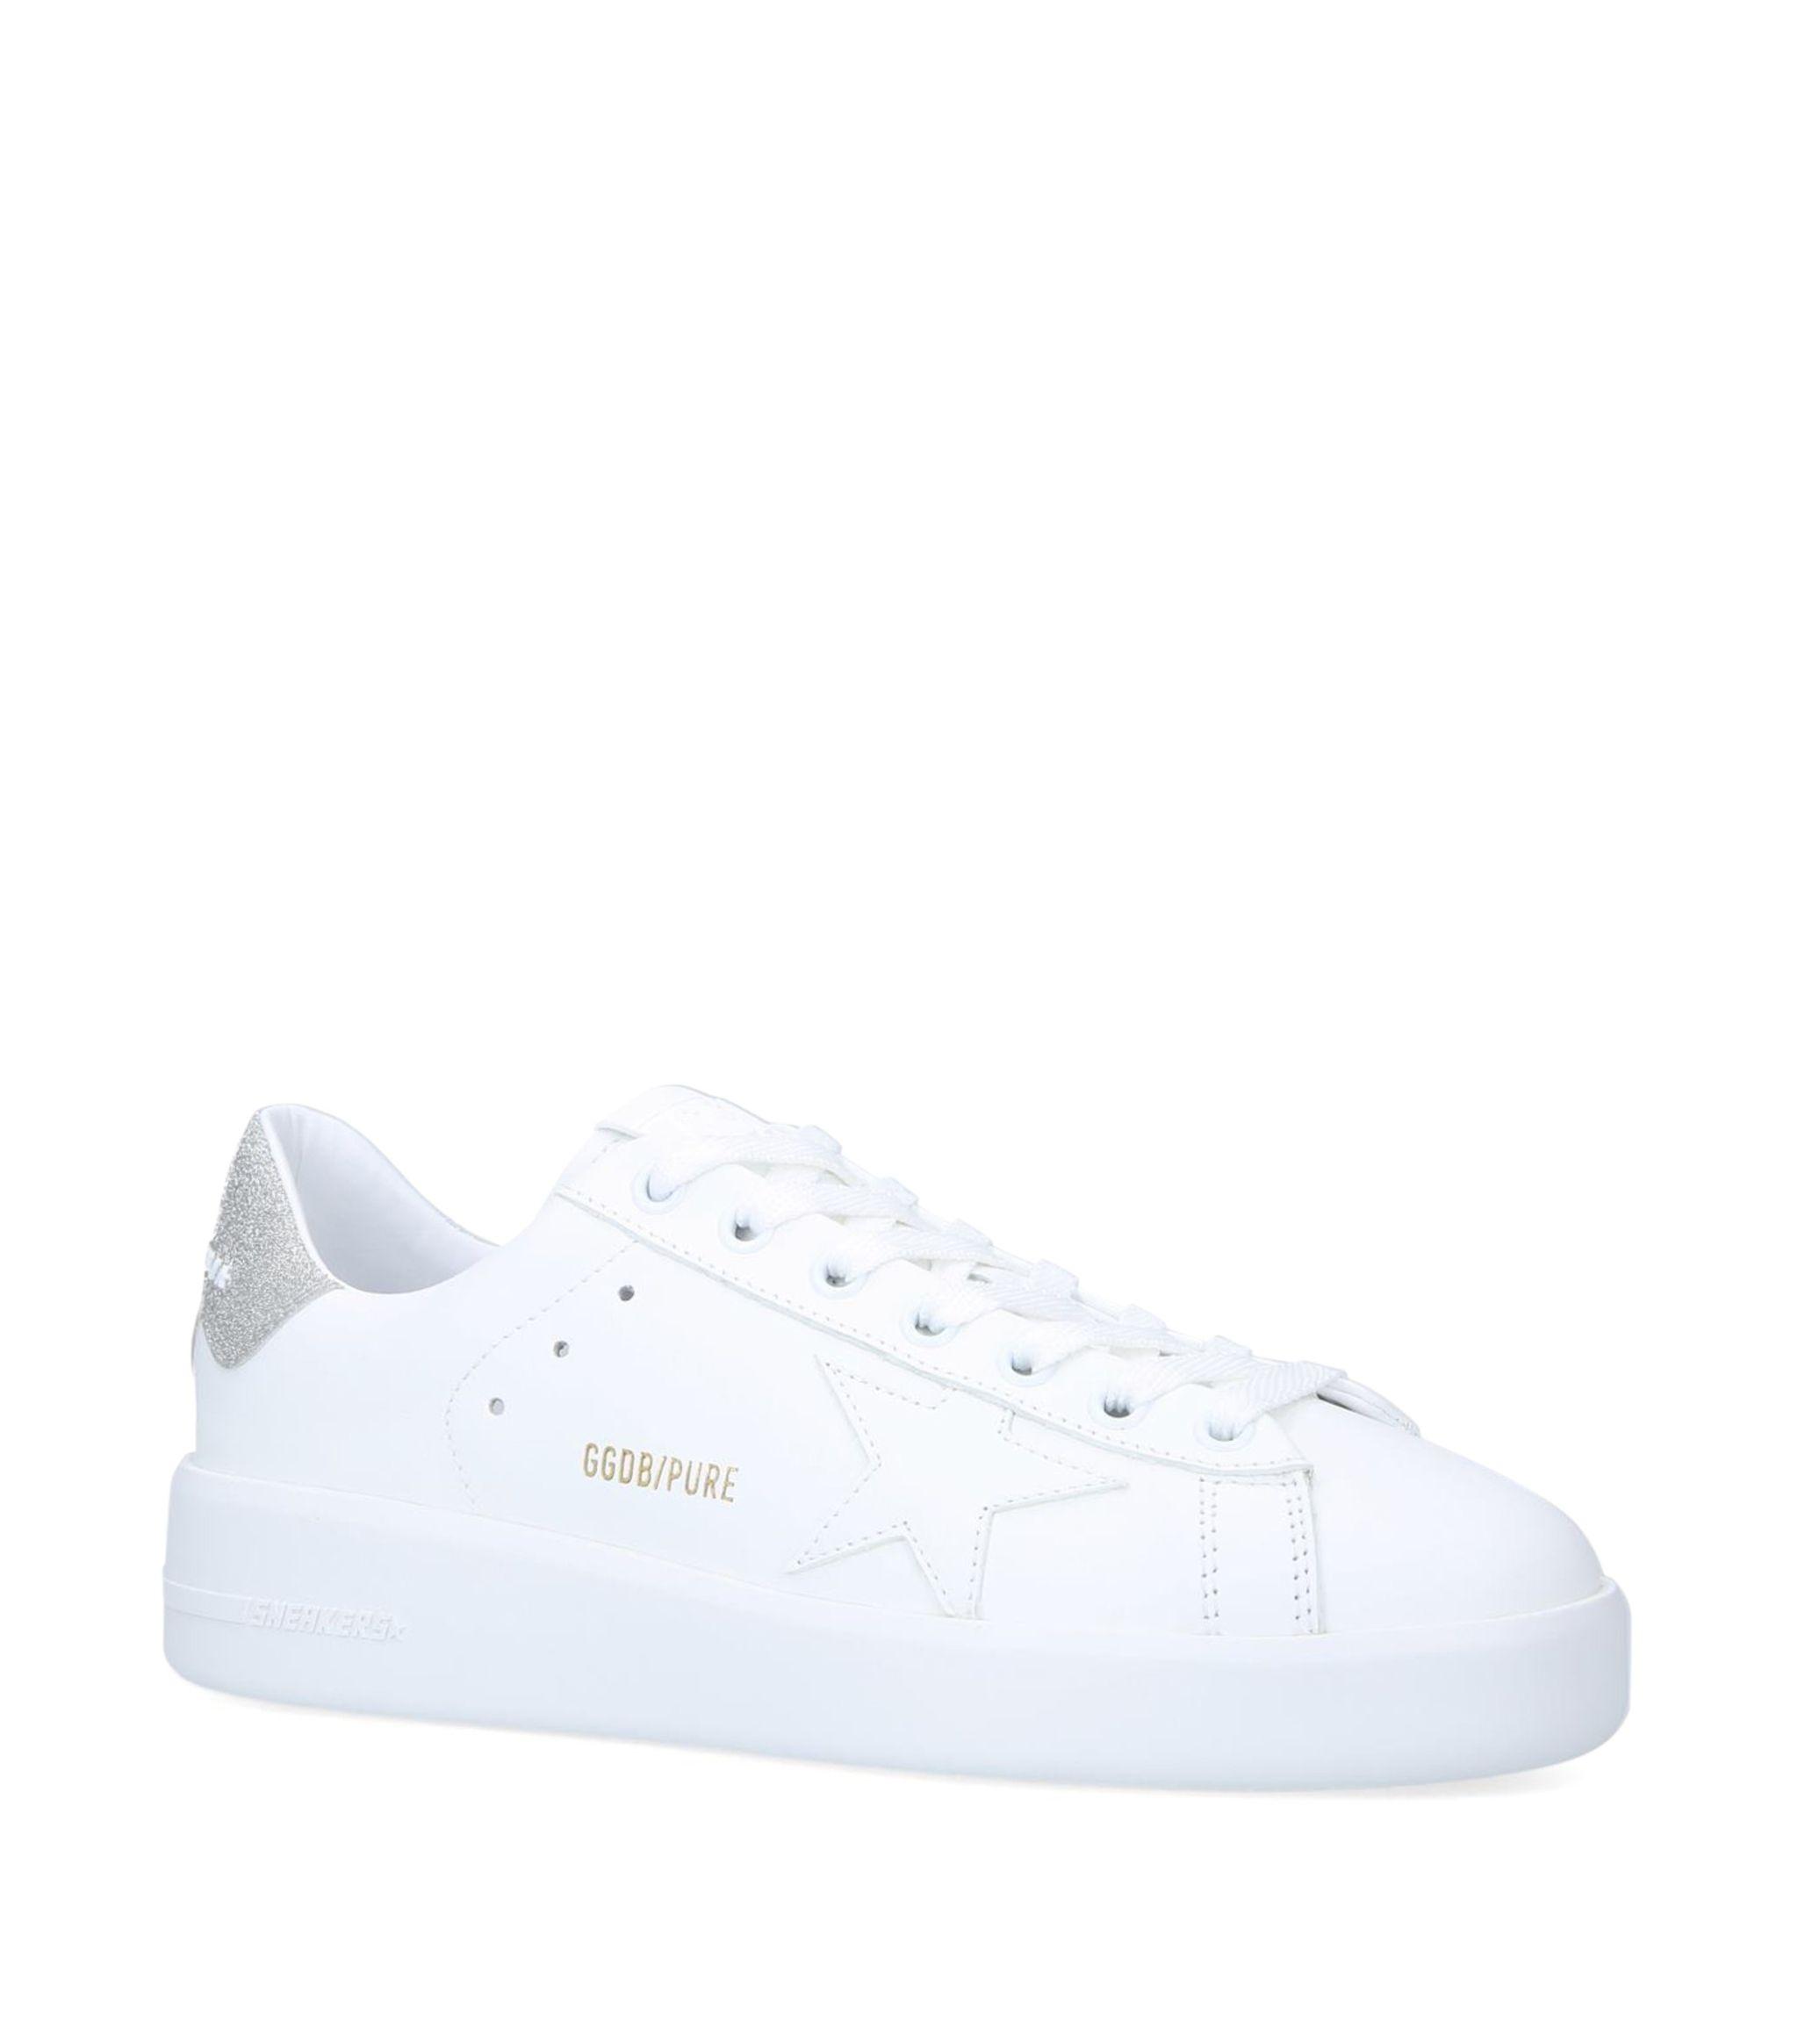 Golden Goose Deluxe Brand Goose Pure Star A1 Sneakers in White - Lyst